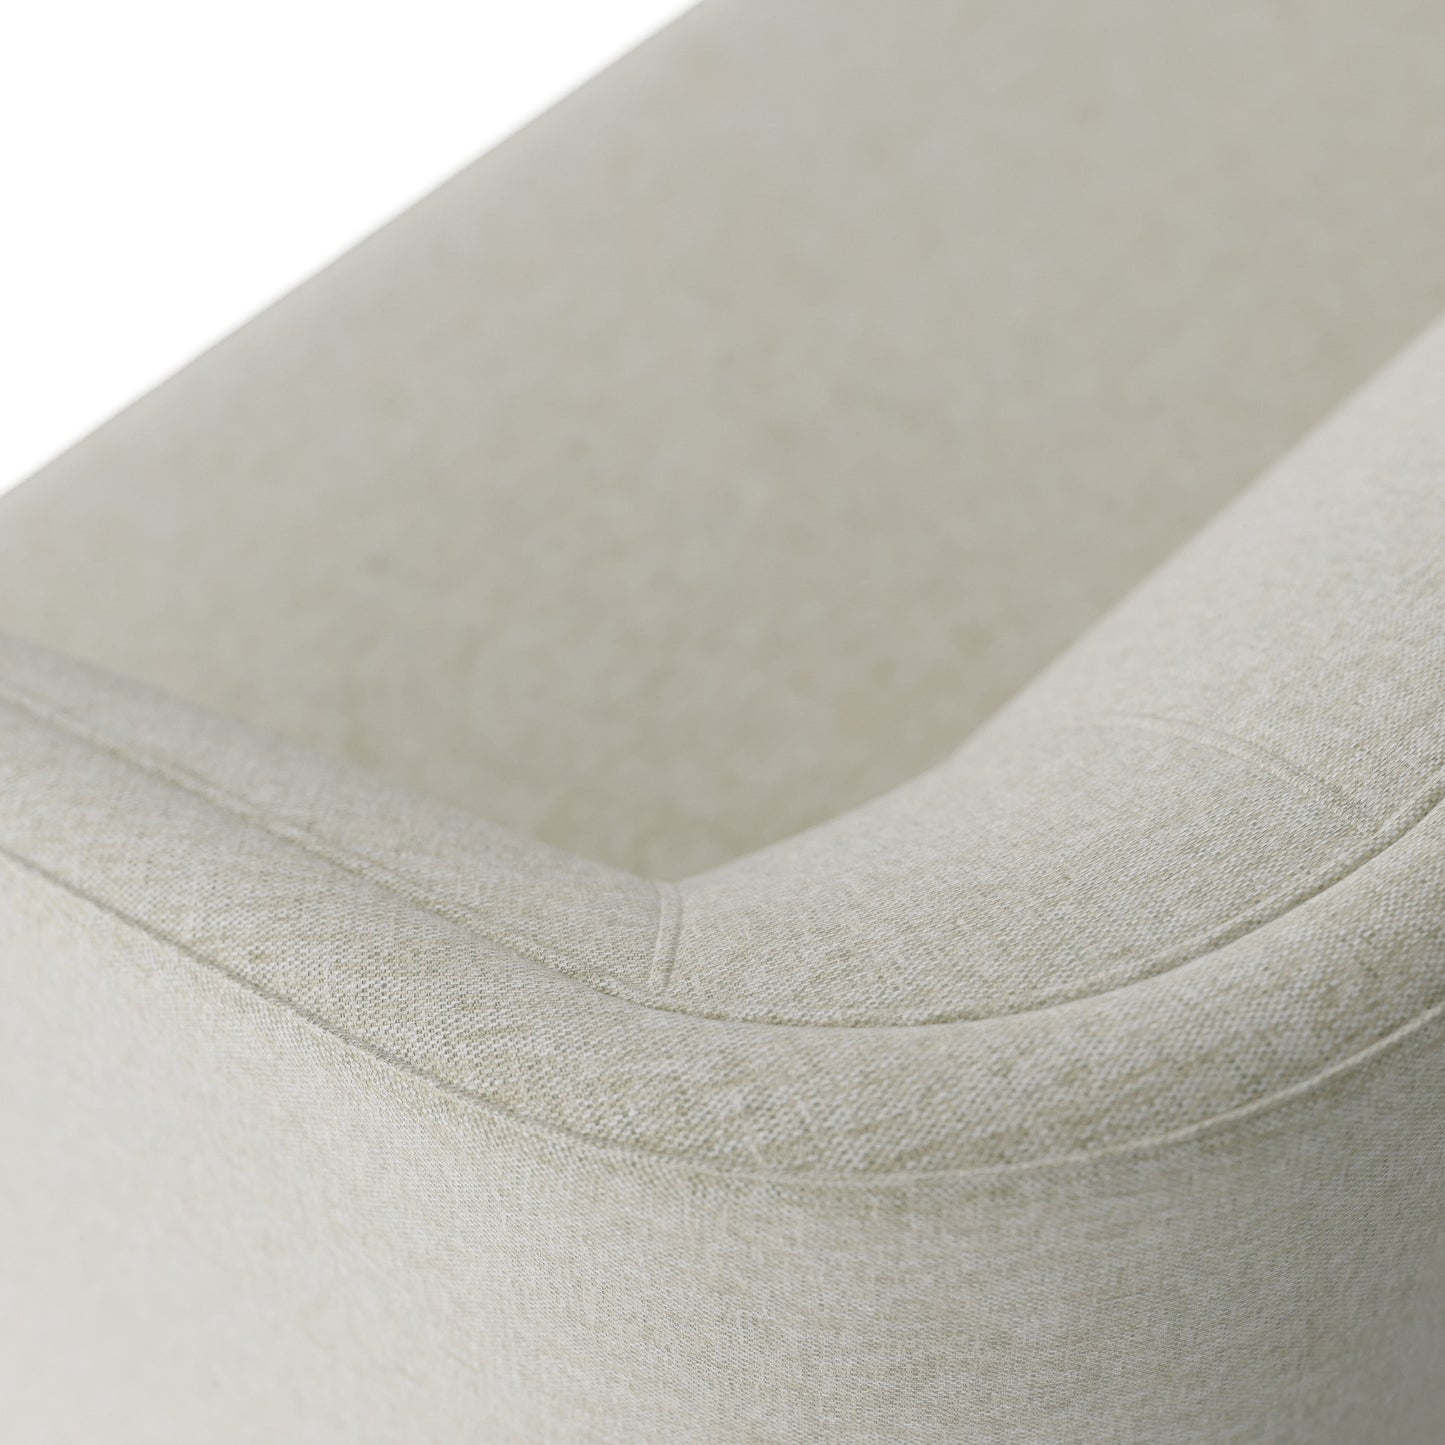 Bishop Sofa Frost Linen White Oyster